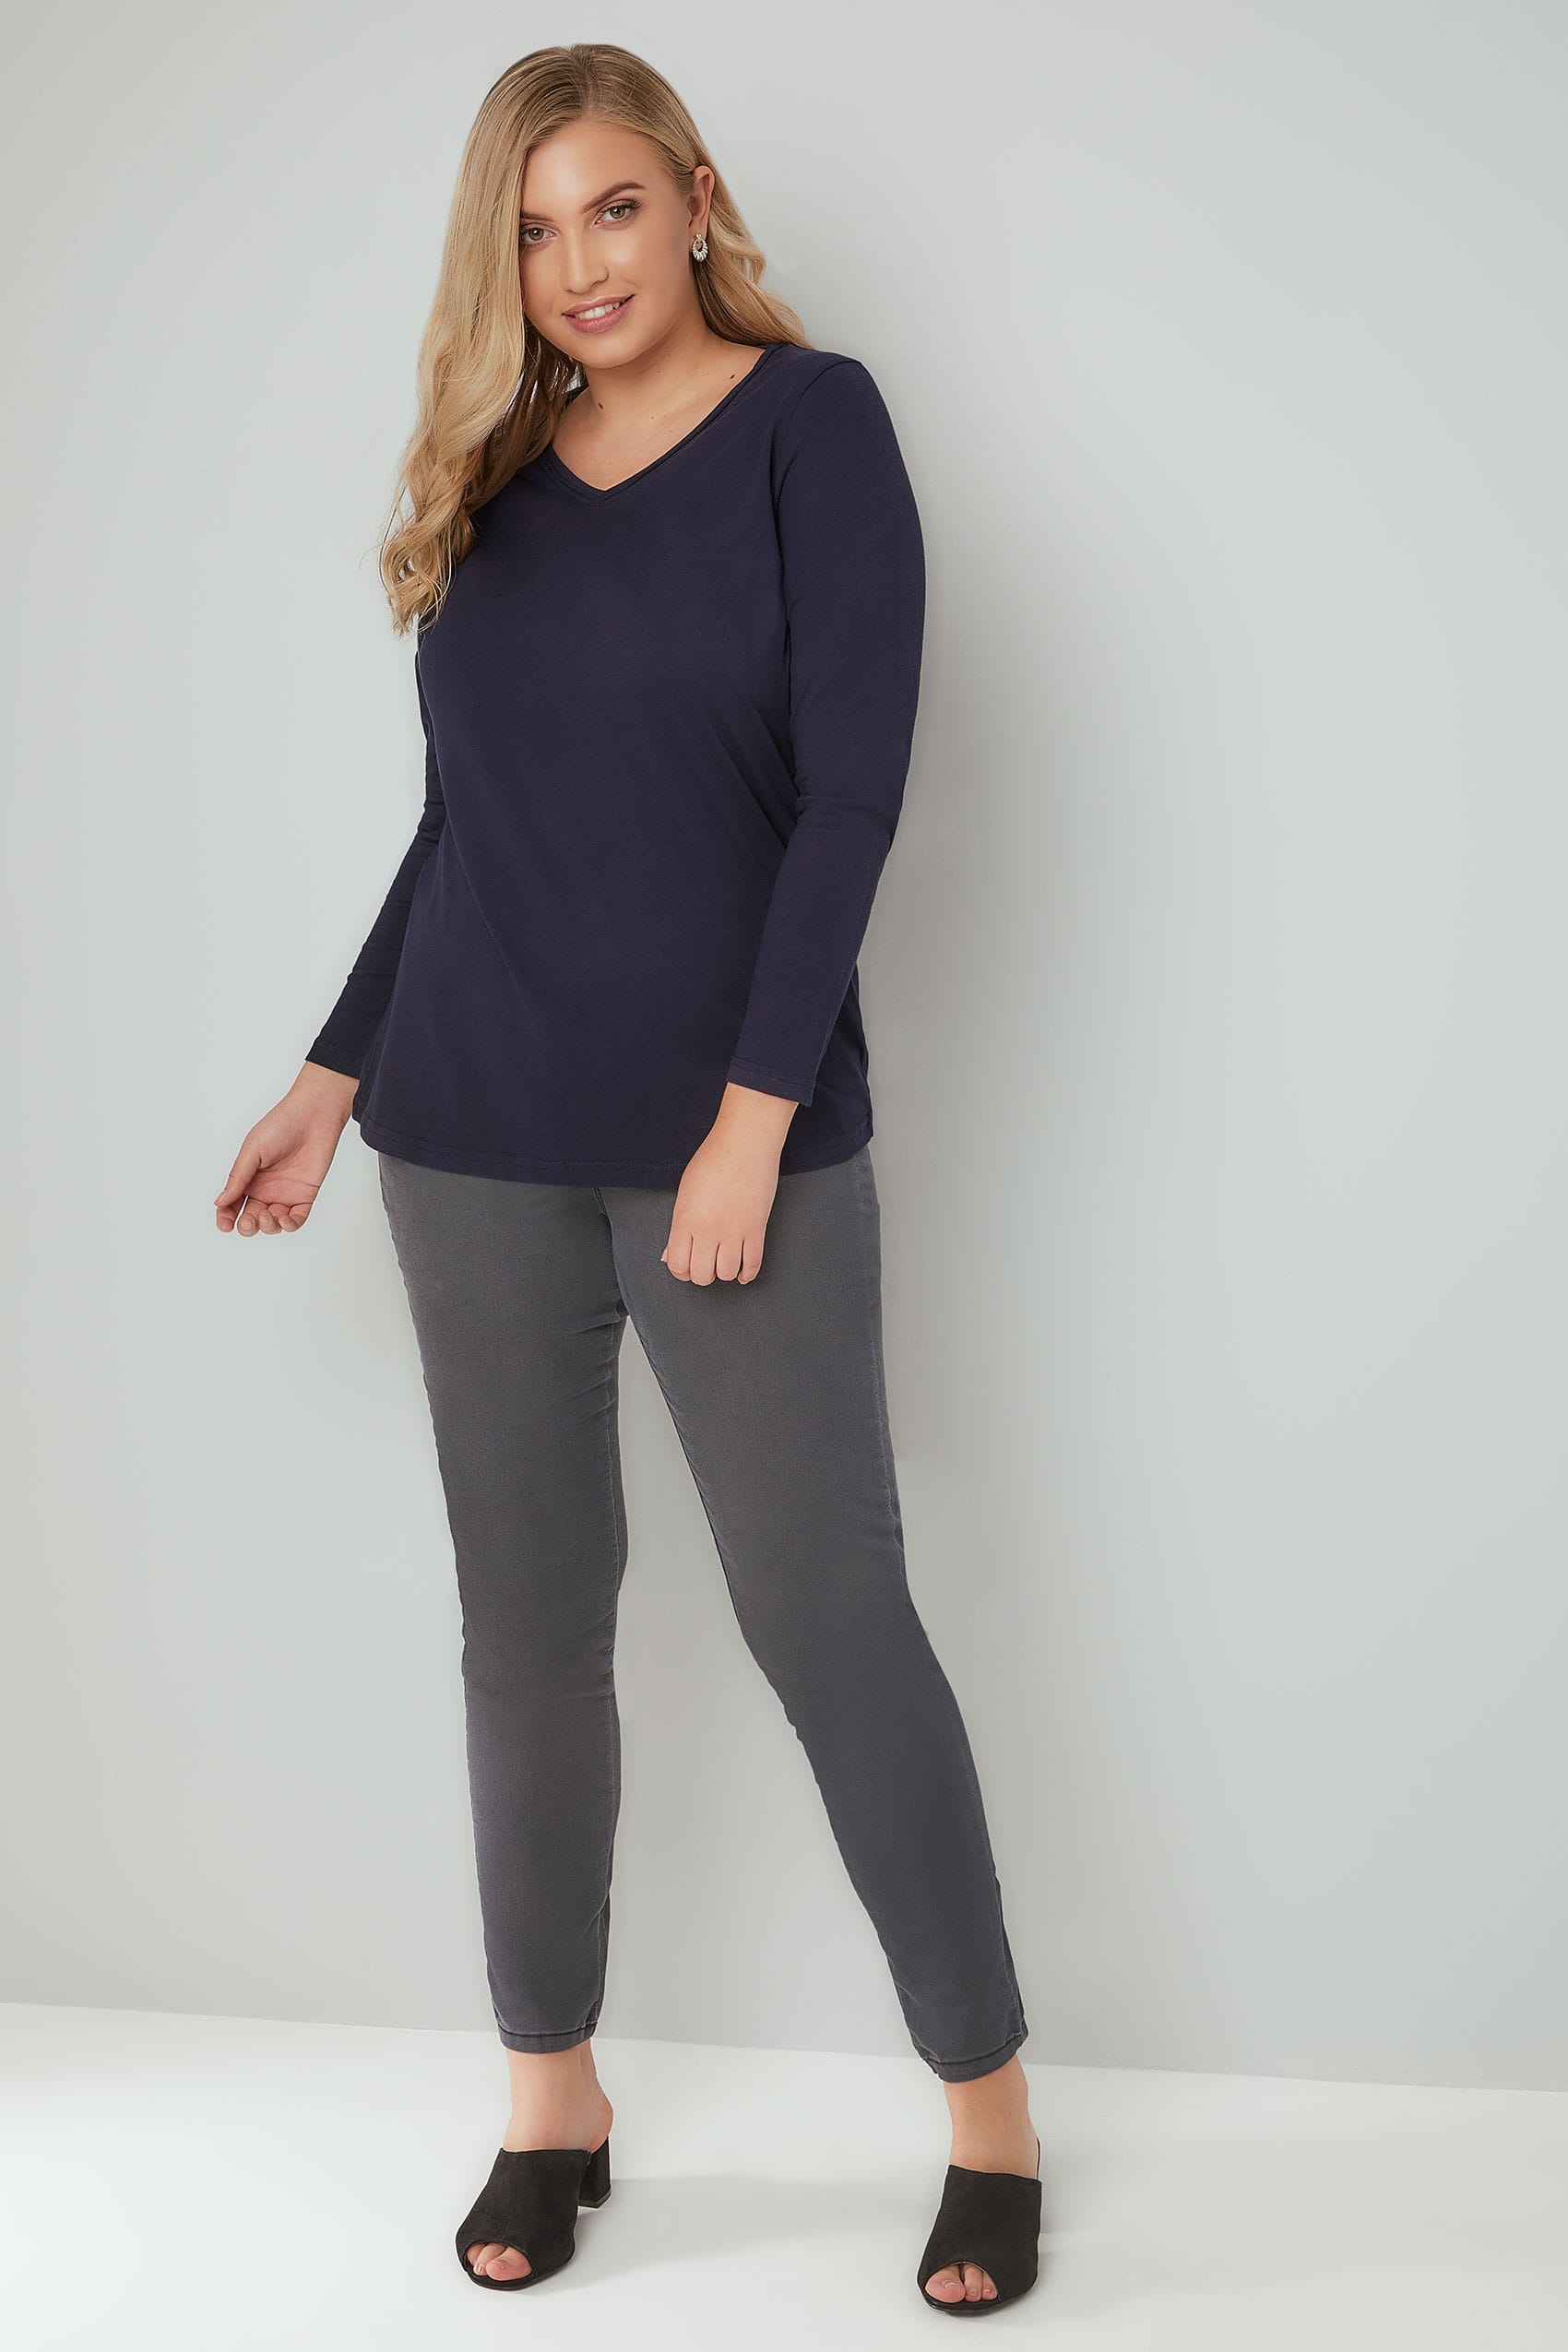 Grey Long Sleeved V-Neck Jersey Top, Plus size 16 to 36